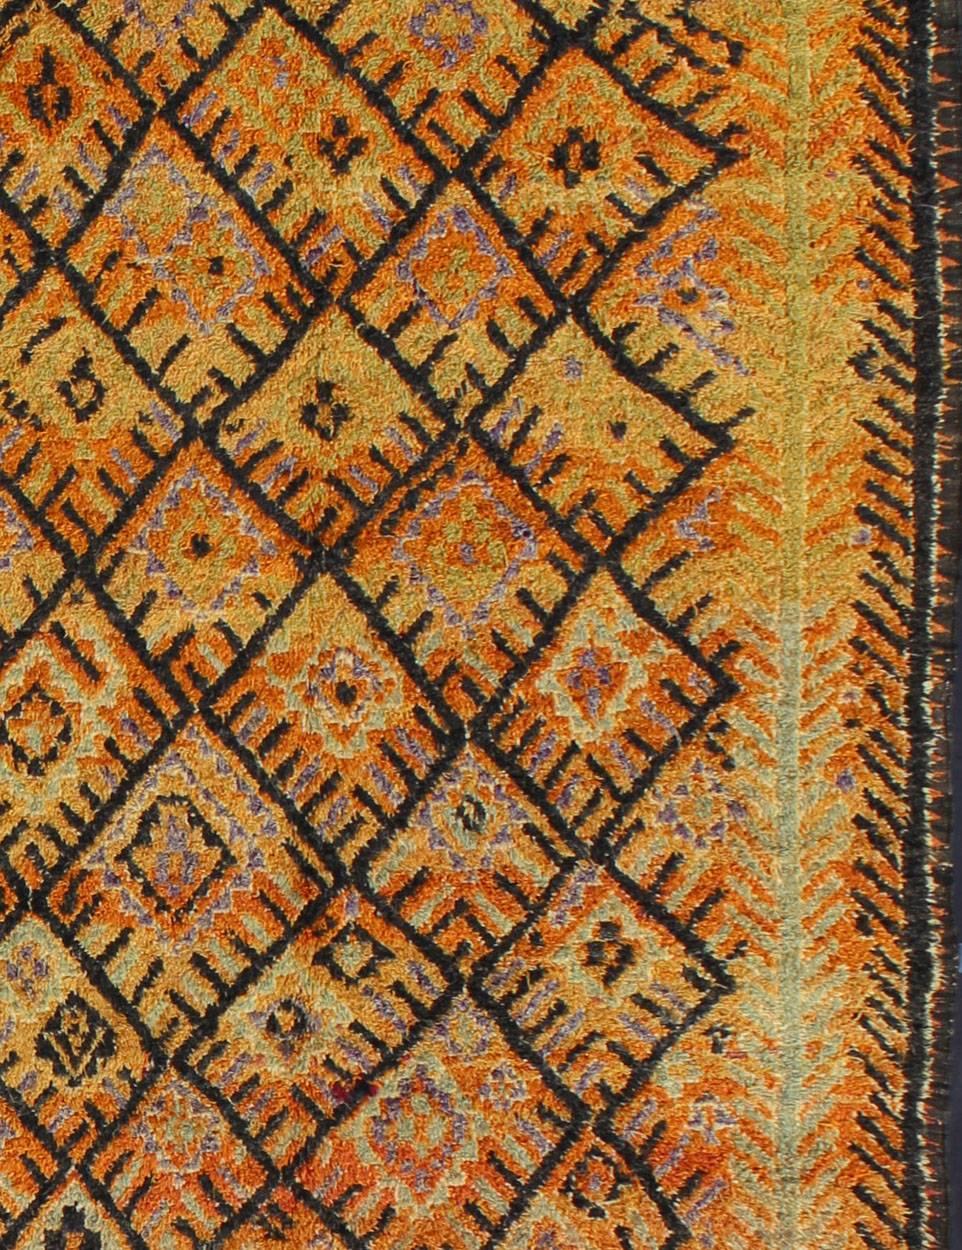 Measures: 6'6'' x 16'0''.
This vintage Moroccan rug was woven by the Moroccan Berber tribes of Talsint. A lovely gallery rug, it has a two long mint green vines that run on either side of the deep black diamond pattern. The rich orange alternates to